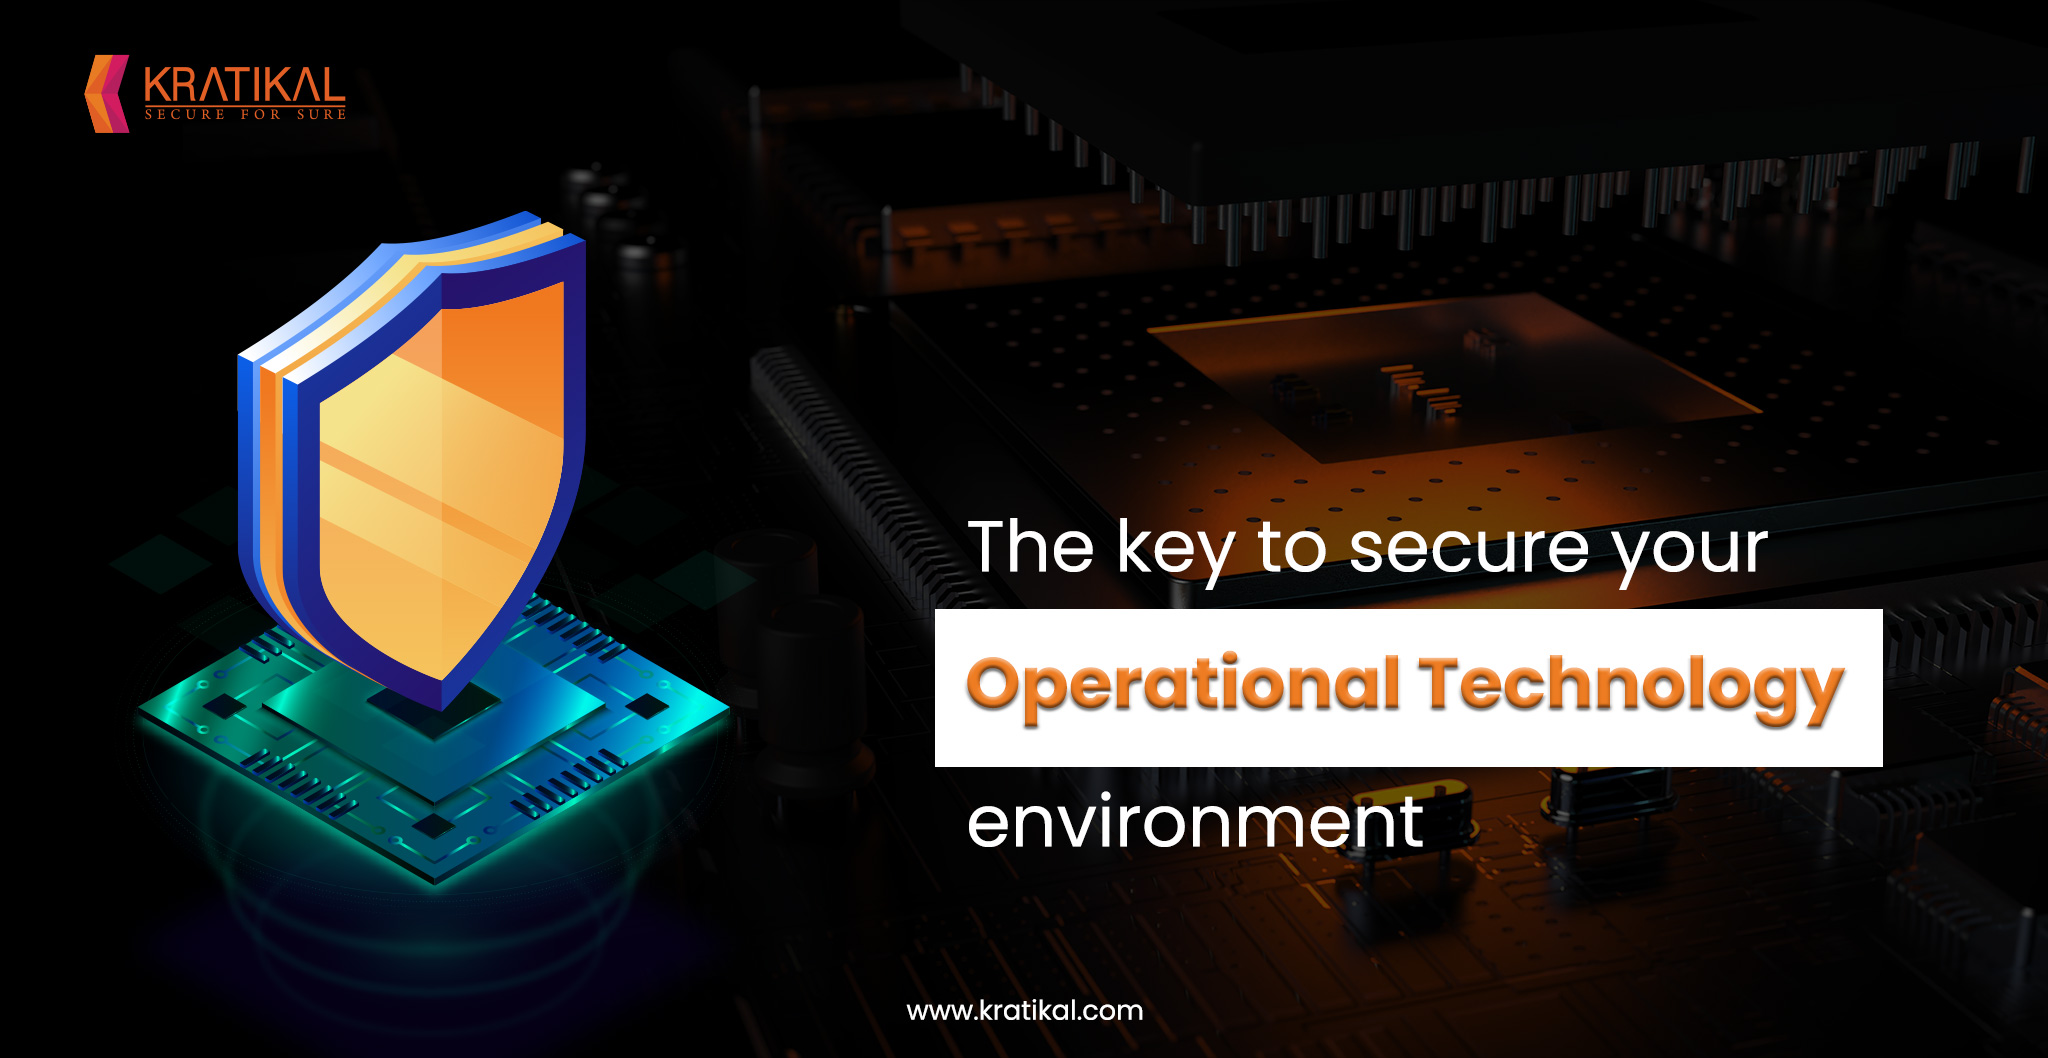 "Reducing the attack surface: the key to secure your OT environment"